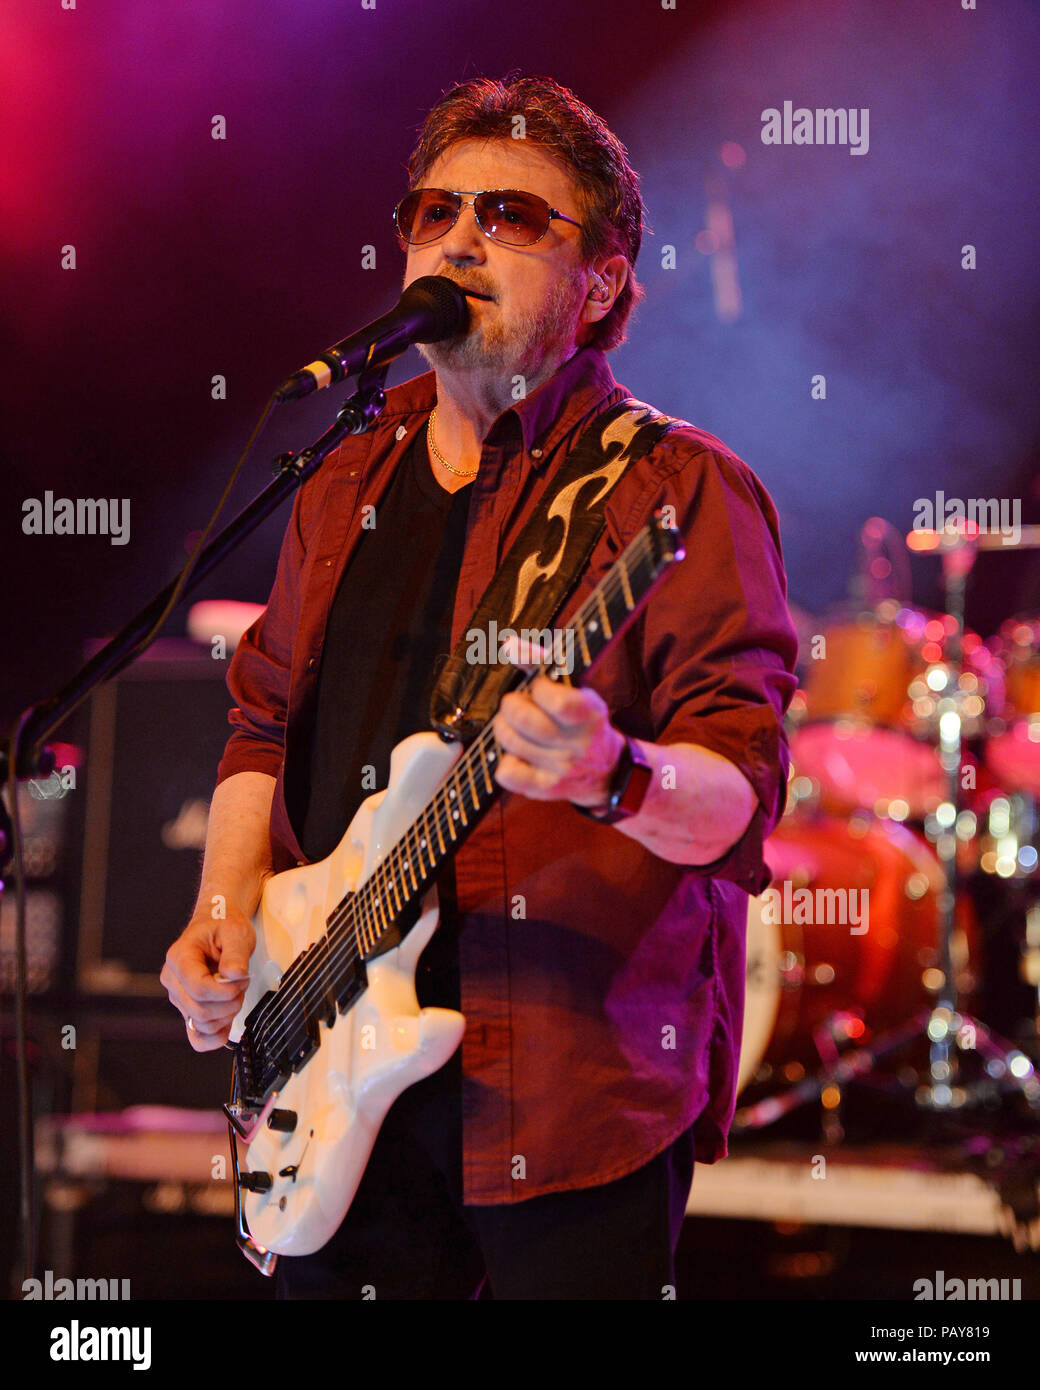 POMPANO BEACH, FL - AUGUST 15: Eric Bloom, Jules Radino and Donald 'Buck Dharma' Roeser of Blue Oyster Cult perform at the Pompano Beach Ampitheatre on August 15, 2015 in Pompano Beach Florida.   People:  Donald Roeser, Buck Dharma Stock Photo